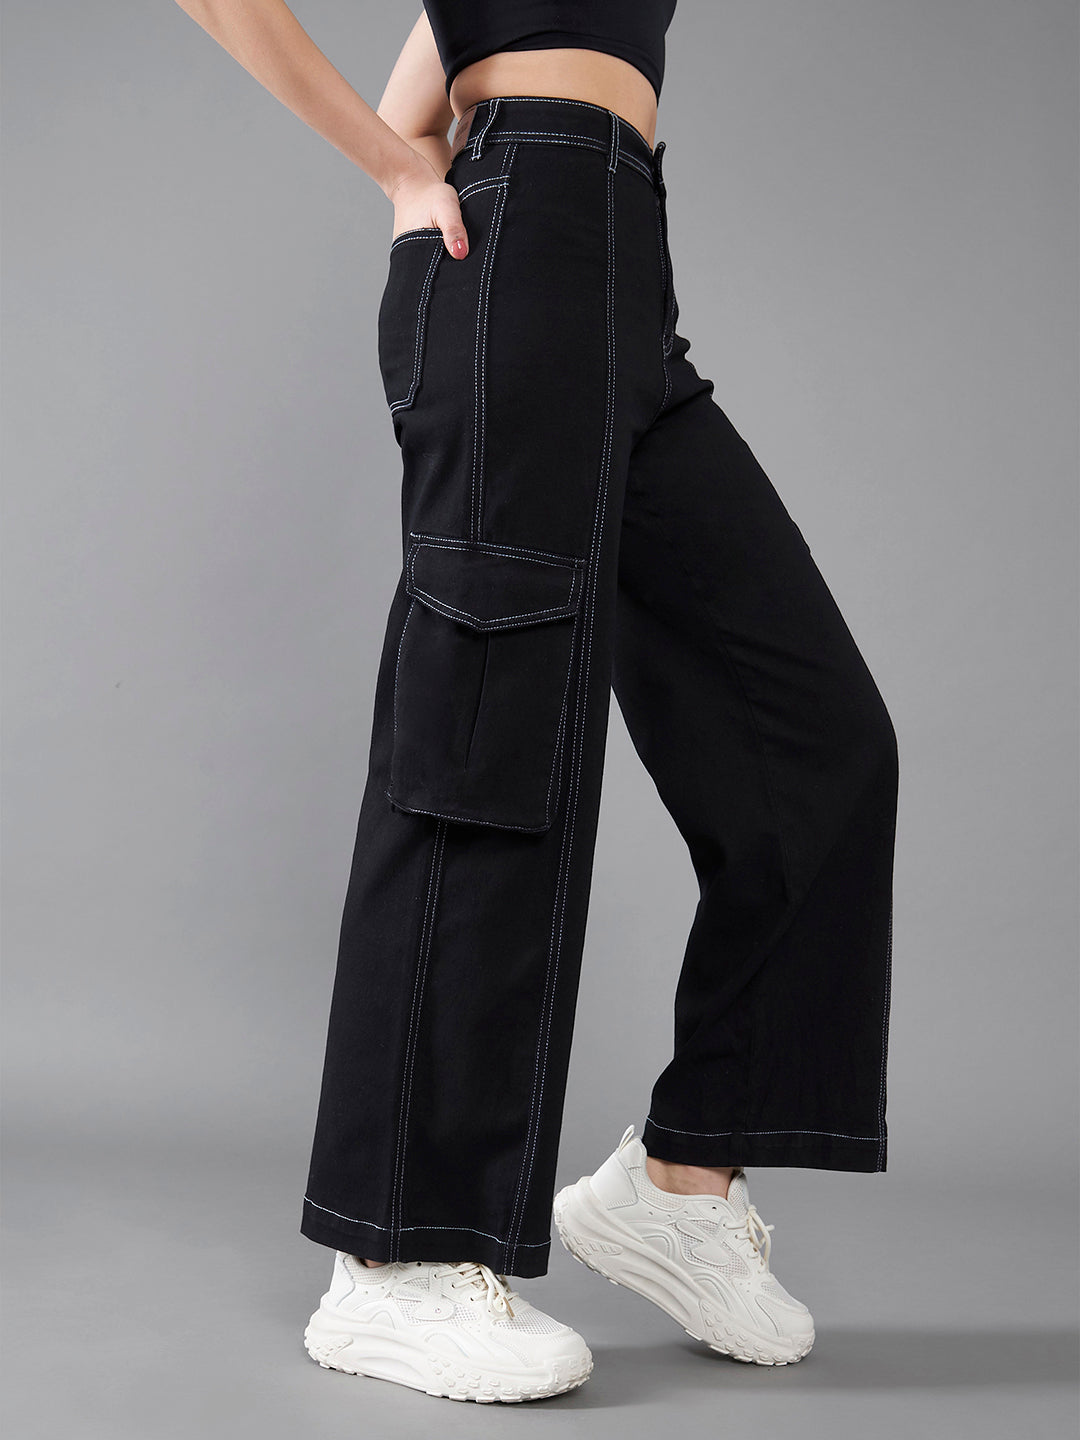 Women's Black Wide-Leg High-Rise Clean-Look Regular-Length Stretchable Patch-Pocketed Denim Jeans